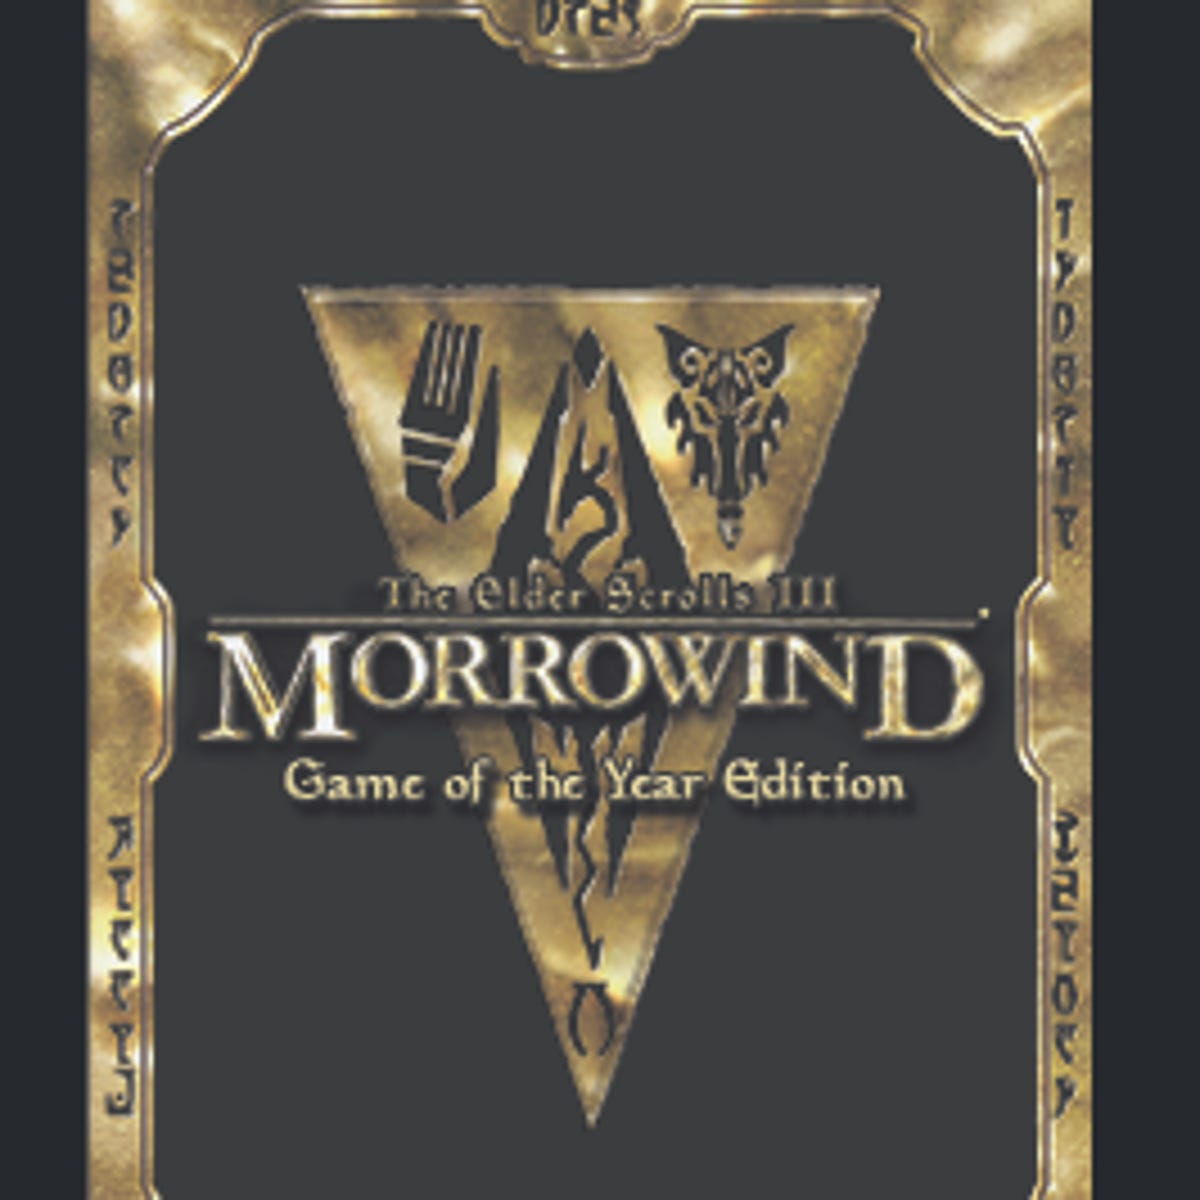 You can get a free copy of Elder Scrolls III: Morrowind for PC - CNET